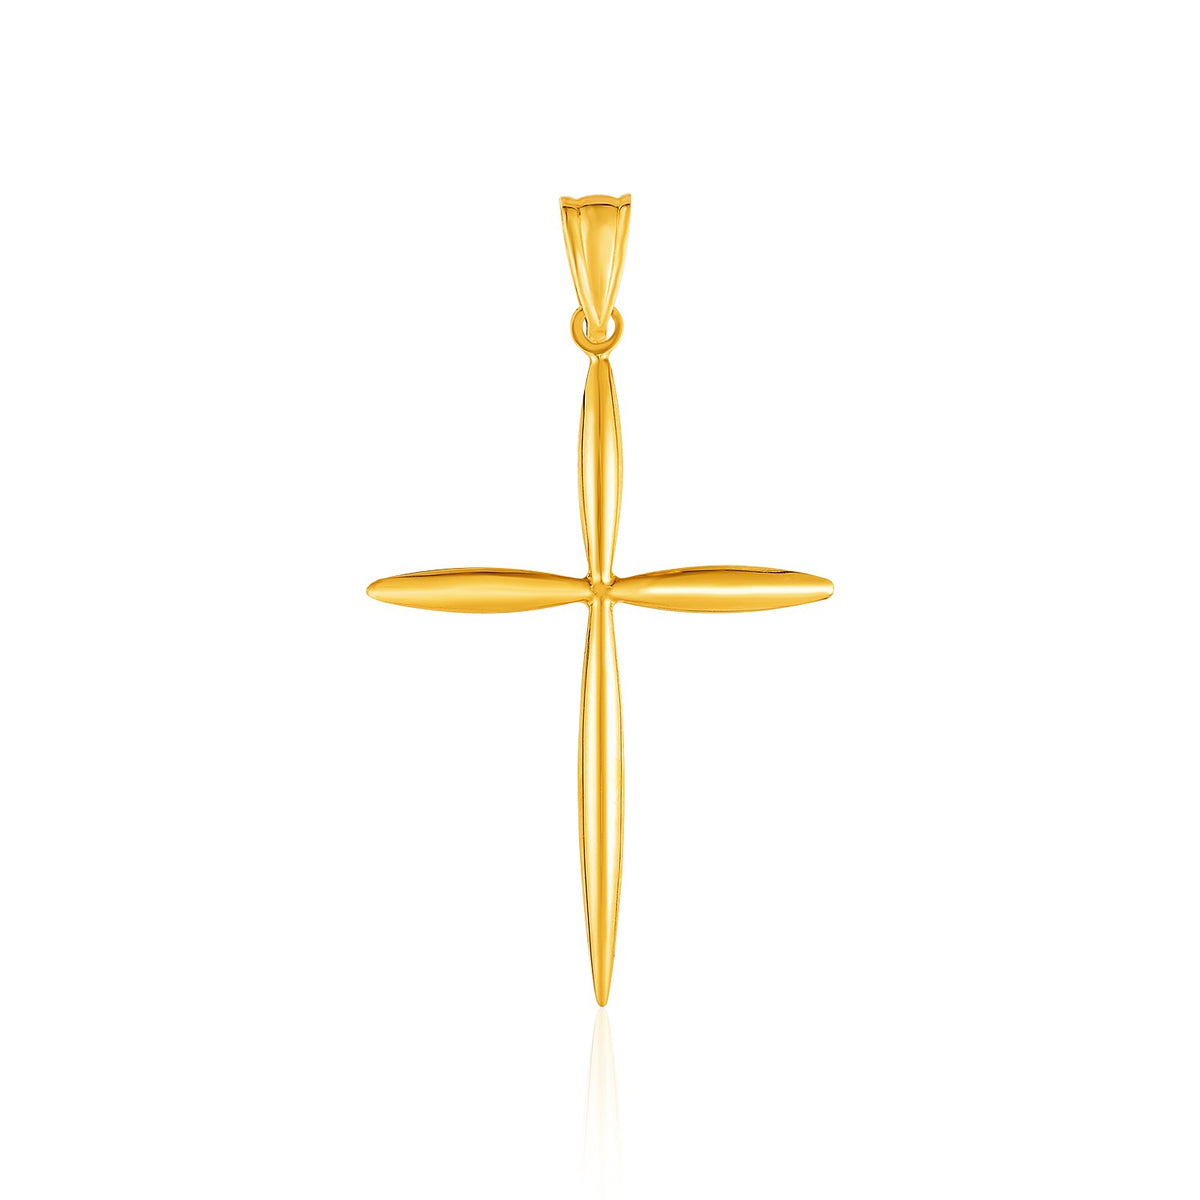 Rounded and Pointed Cross Pendant - 14k Yellow Gold